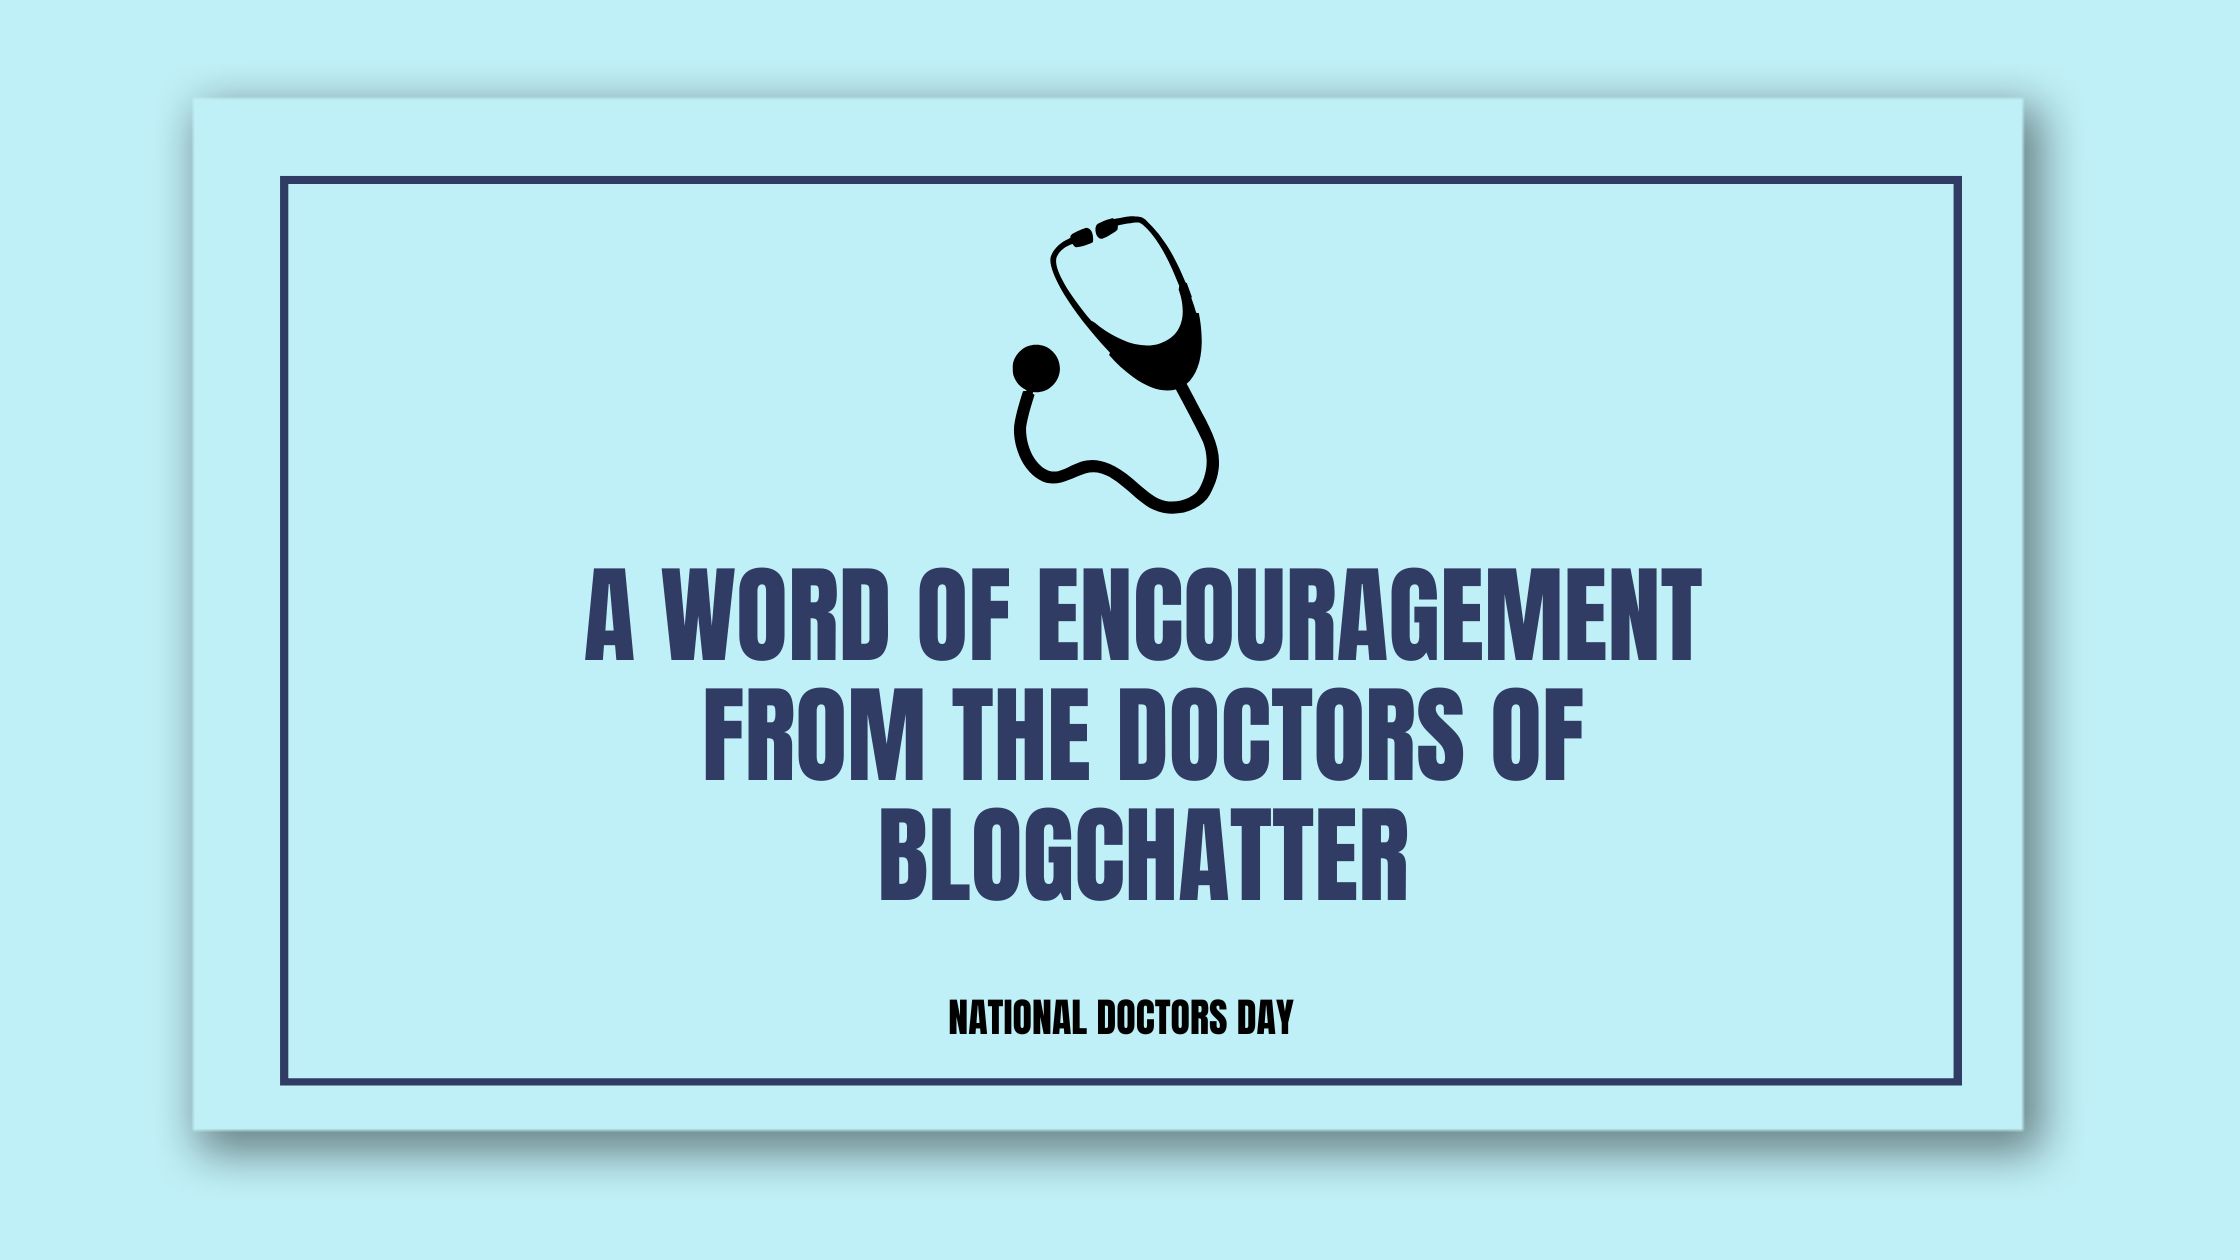 A word of encouragement from the doctors of Blogchatter